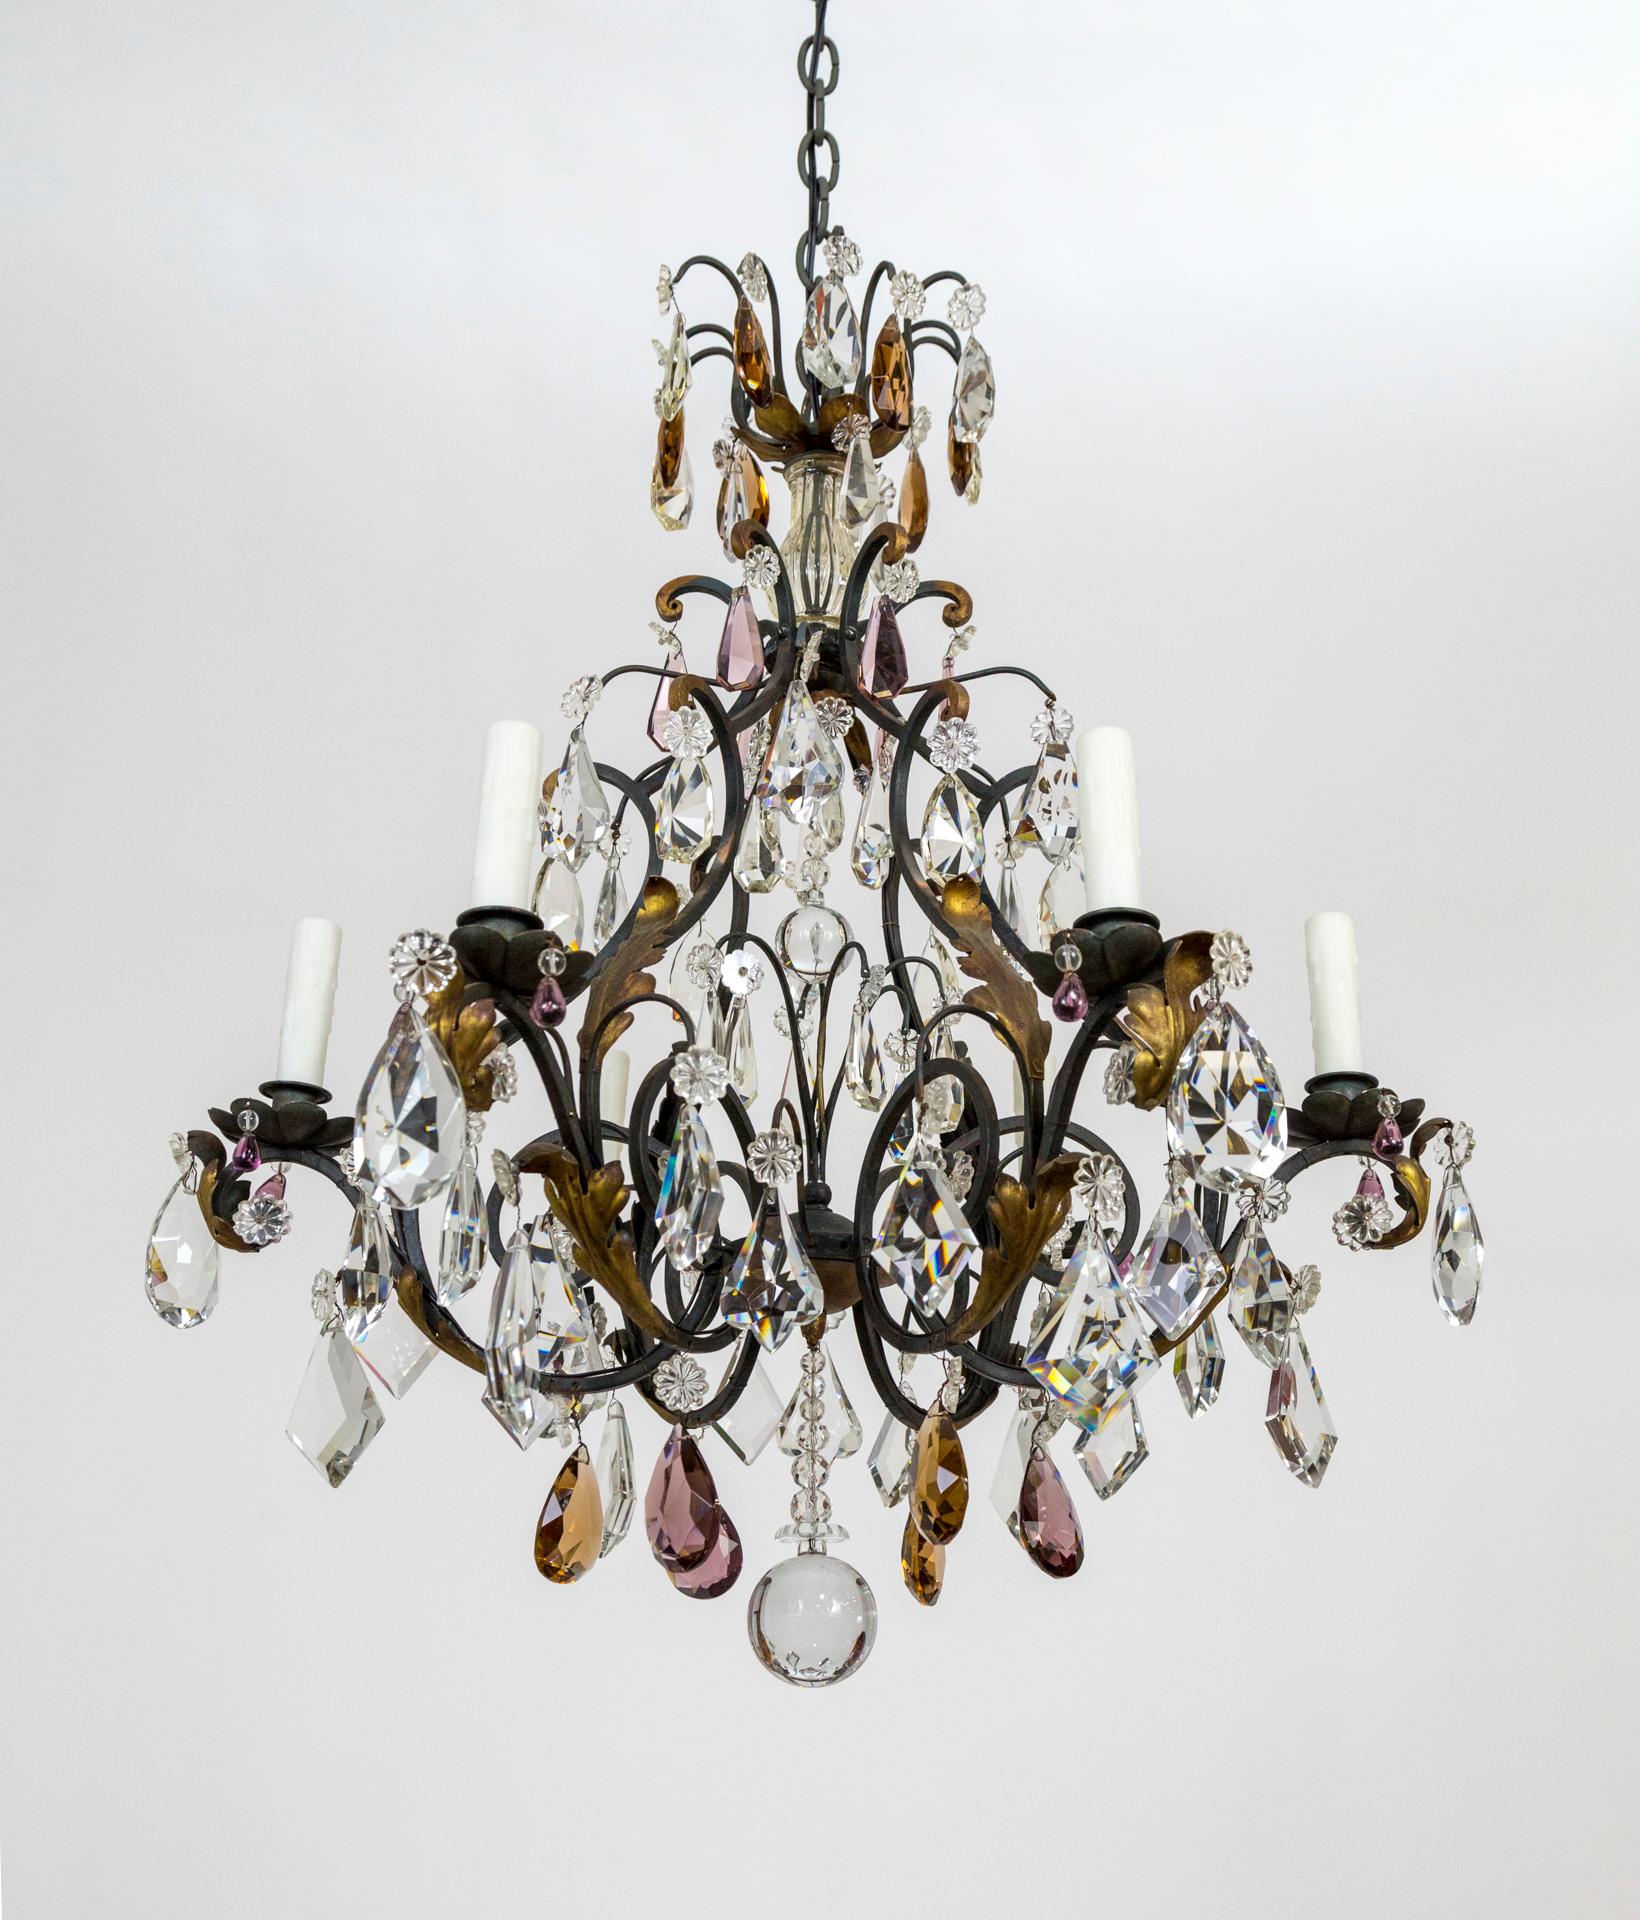 A striking chandelier in shape and color accents - including amethyst and deep amber crystals and varied metal color from brown and black to gold. With exquisite cut crystals, including large pendeloques and spires; gilt acanthus leaf accents and